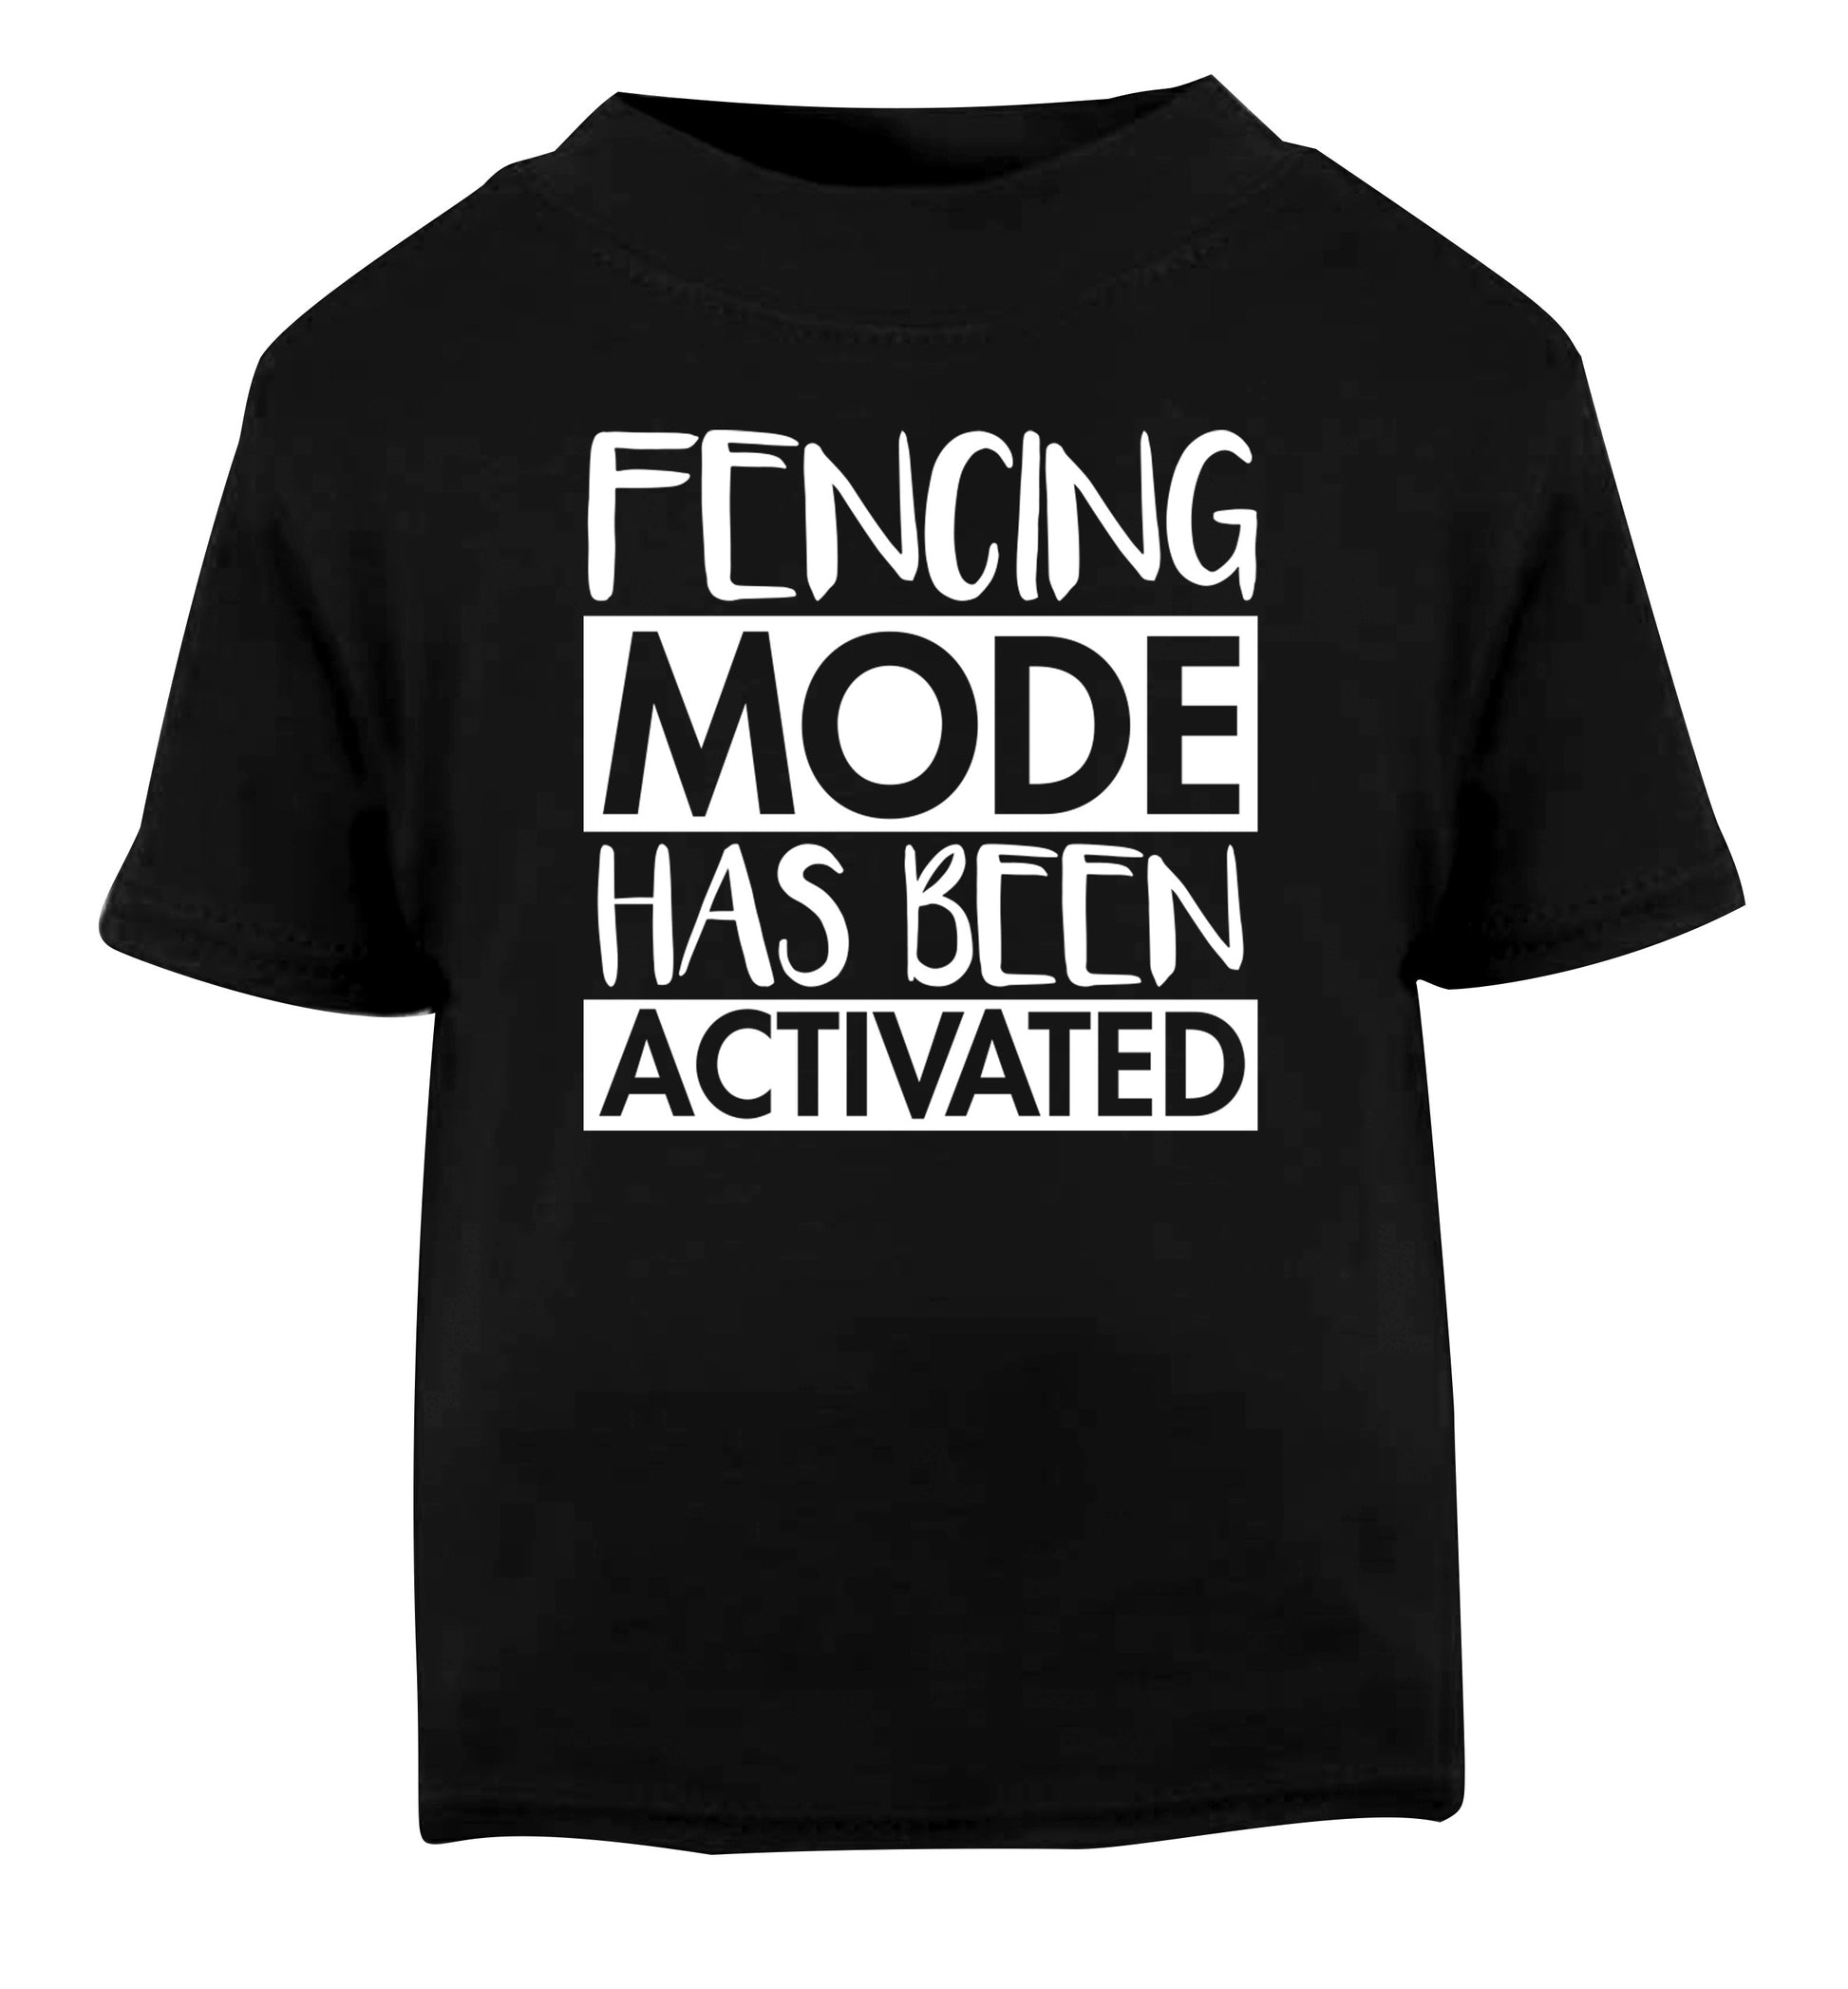 Fencing mode activated Black Baby Toddler Tshirt 2 years